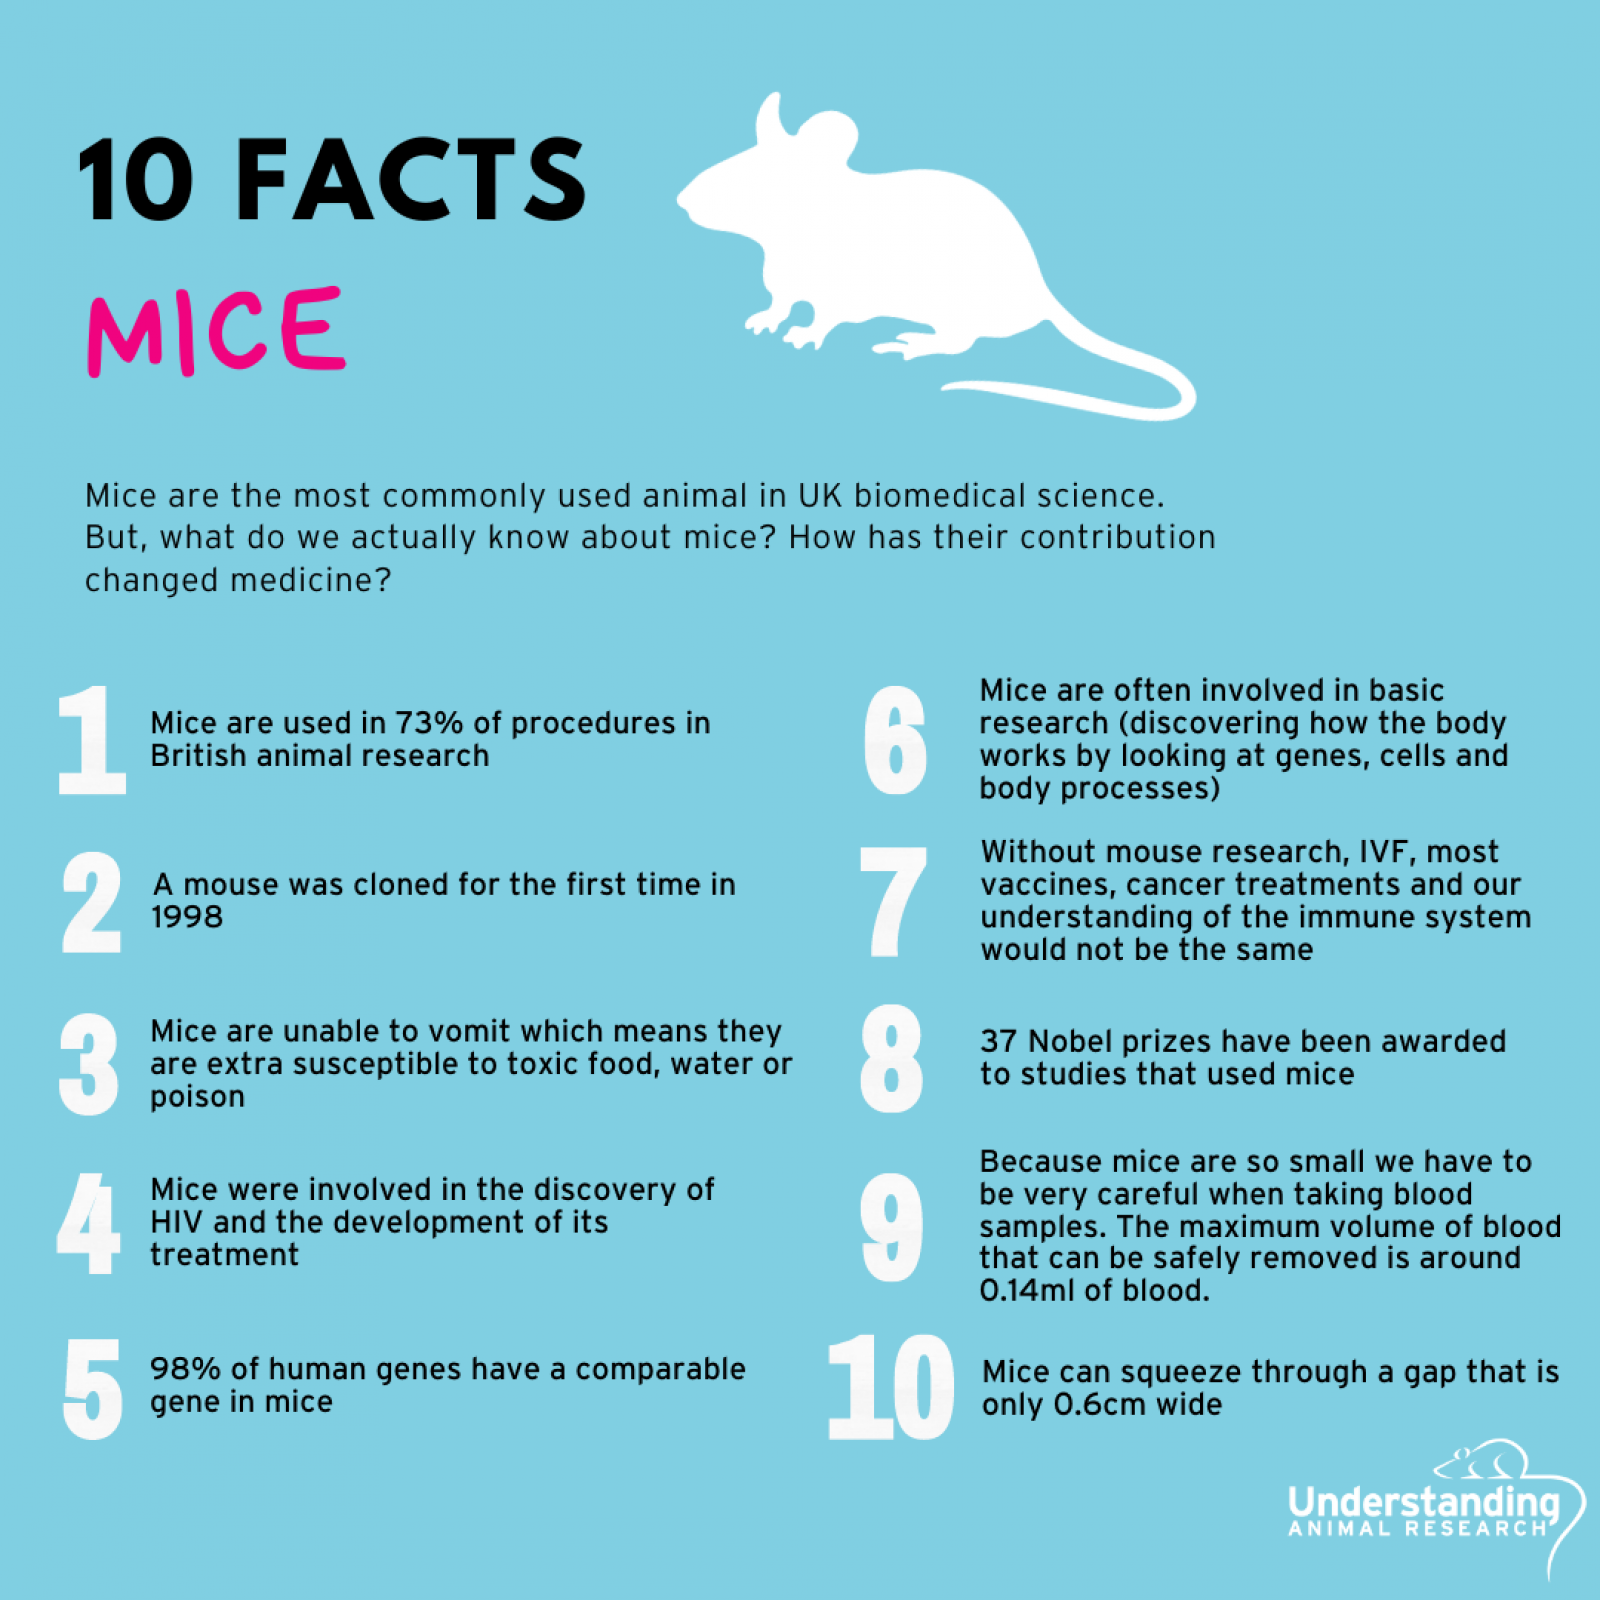 10 facts about mice